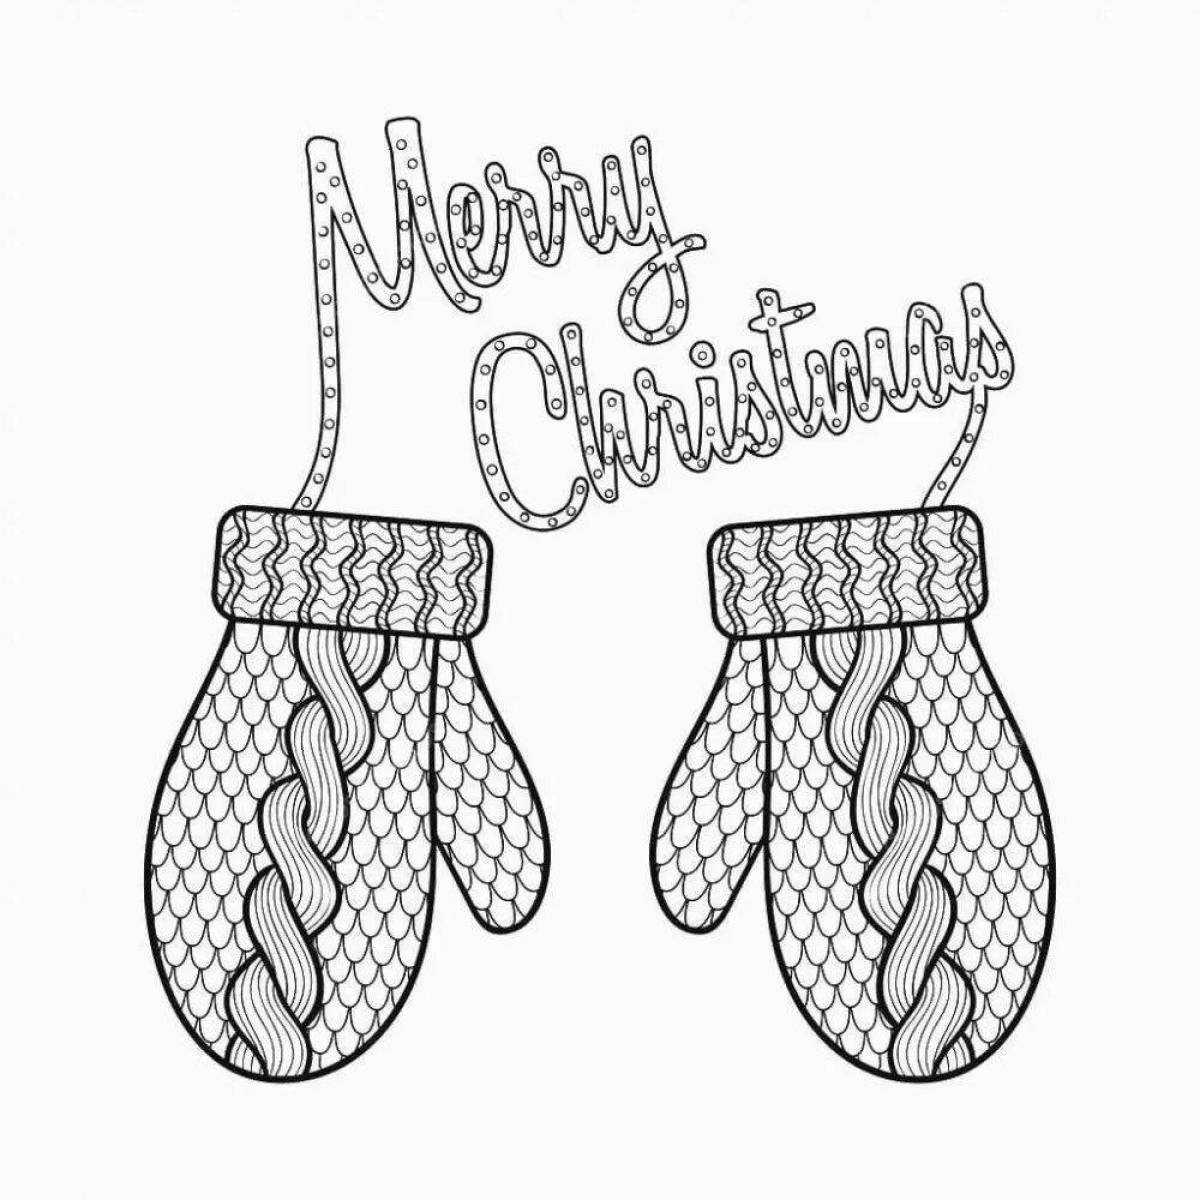 Coloring page joyful rubber mittens